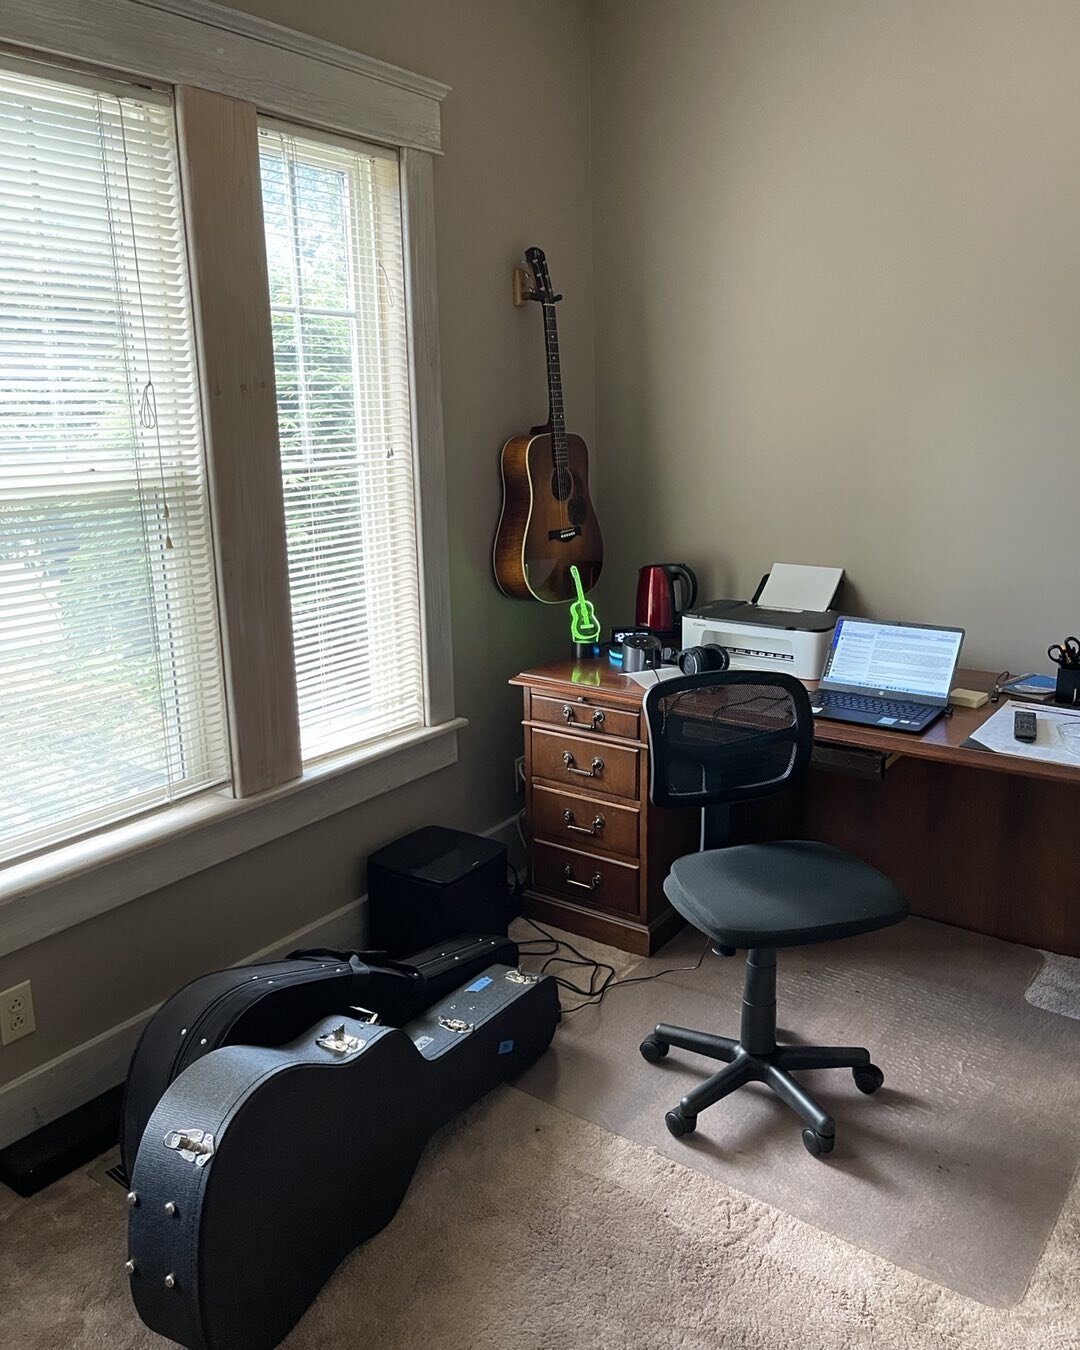 Back in my office on music row! Delighted to be back in! #productive #musicrow #guitar #parlor #bestbuiltsongs